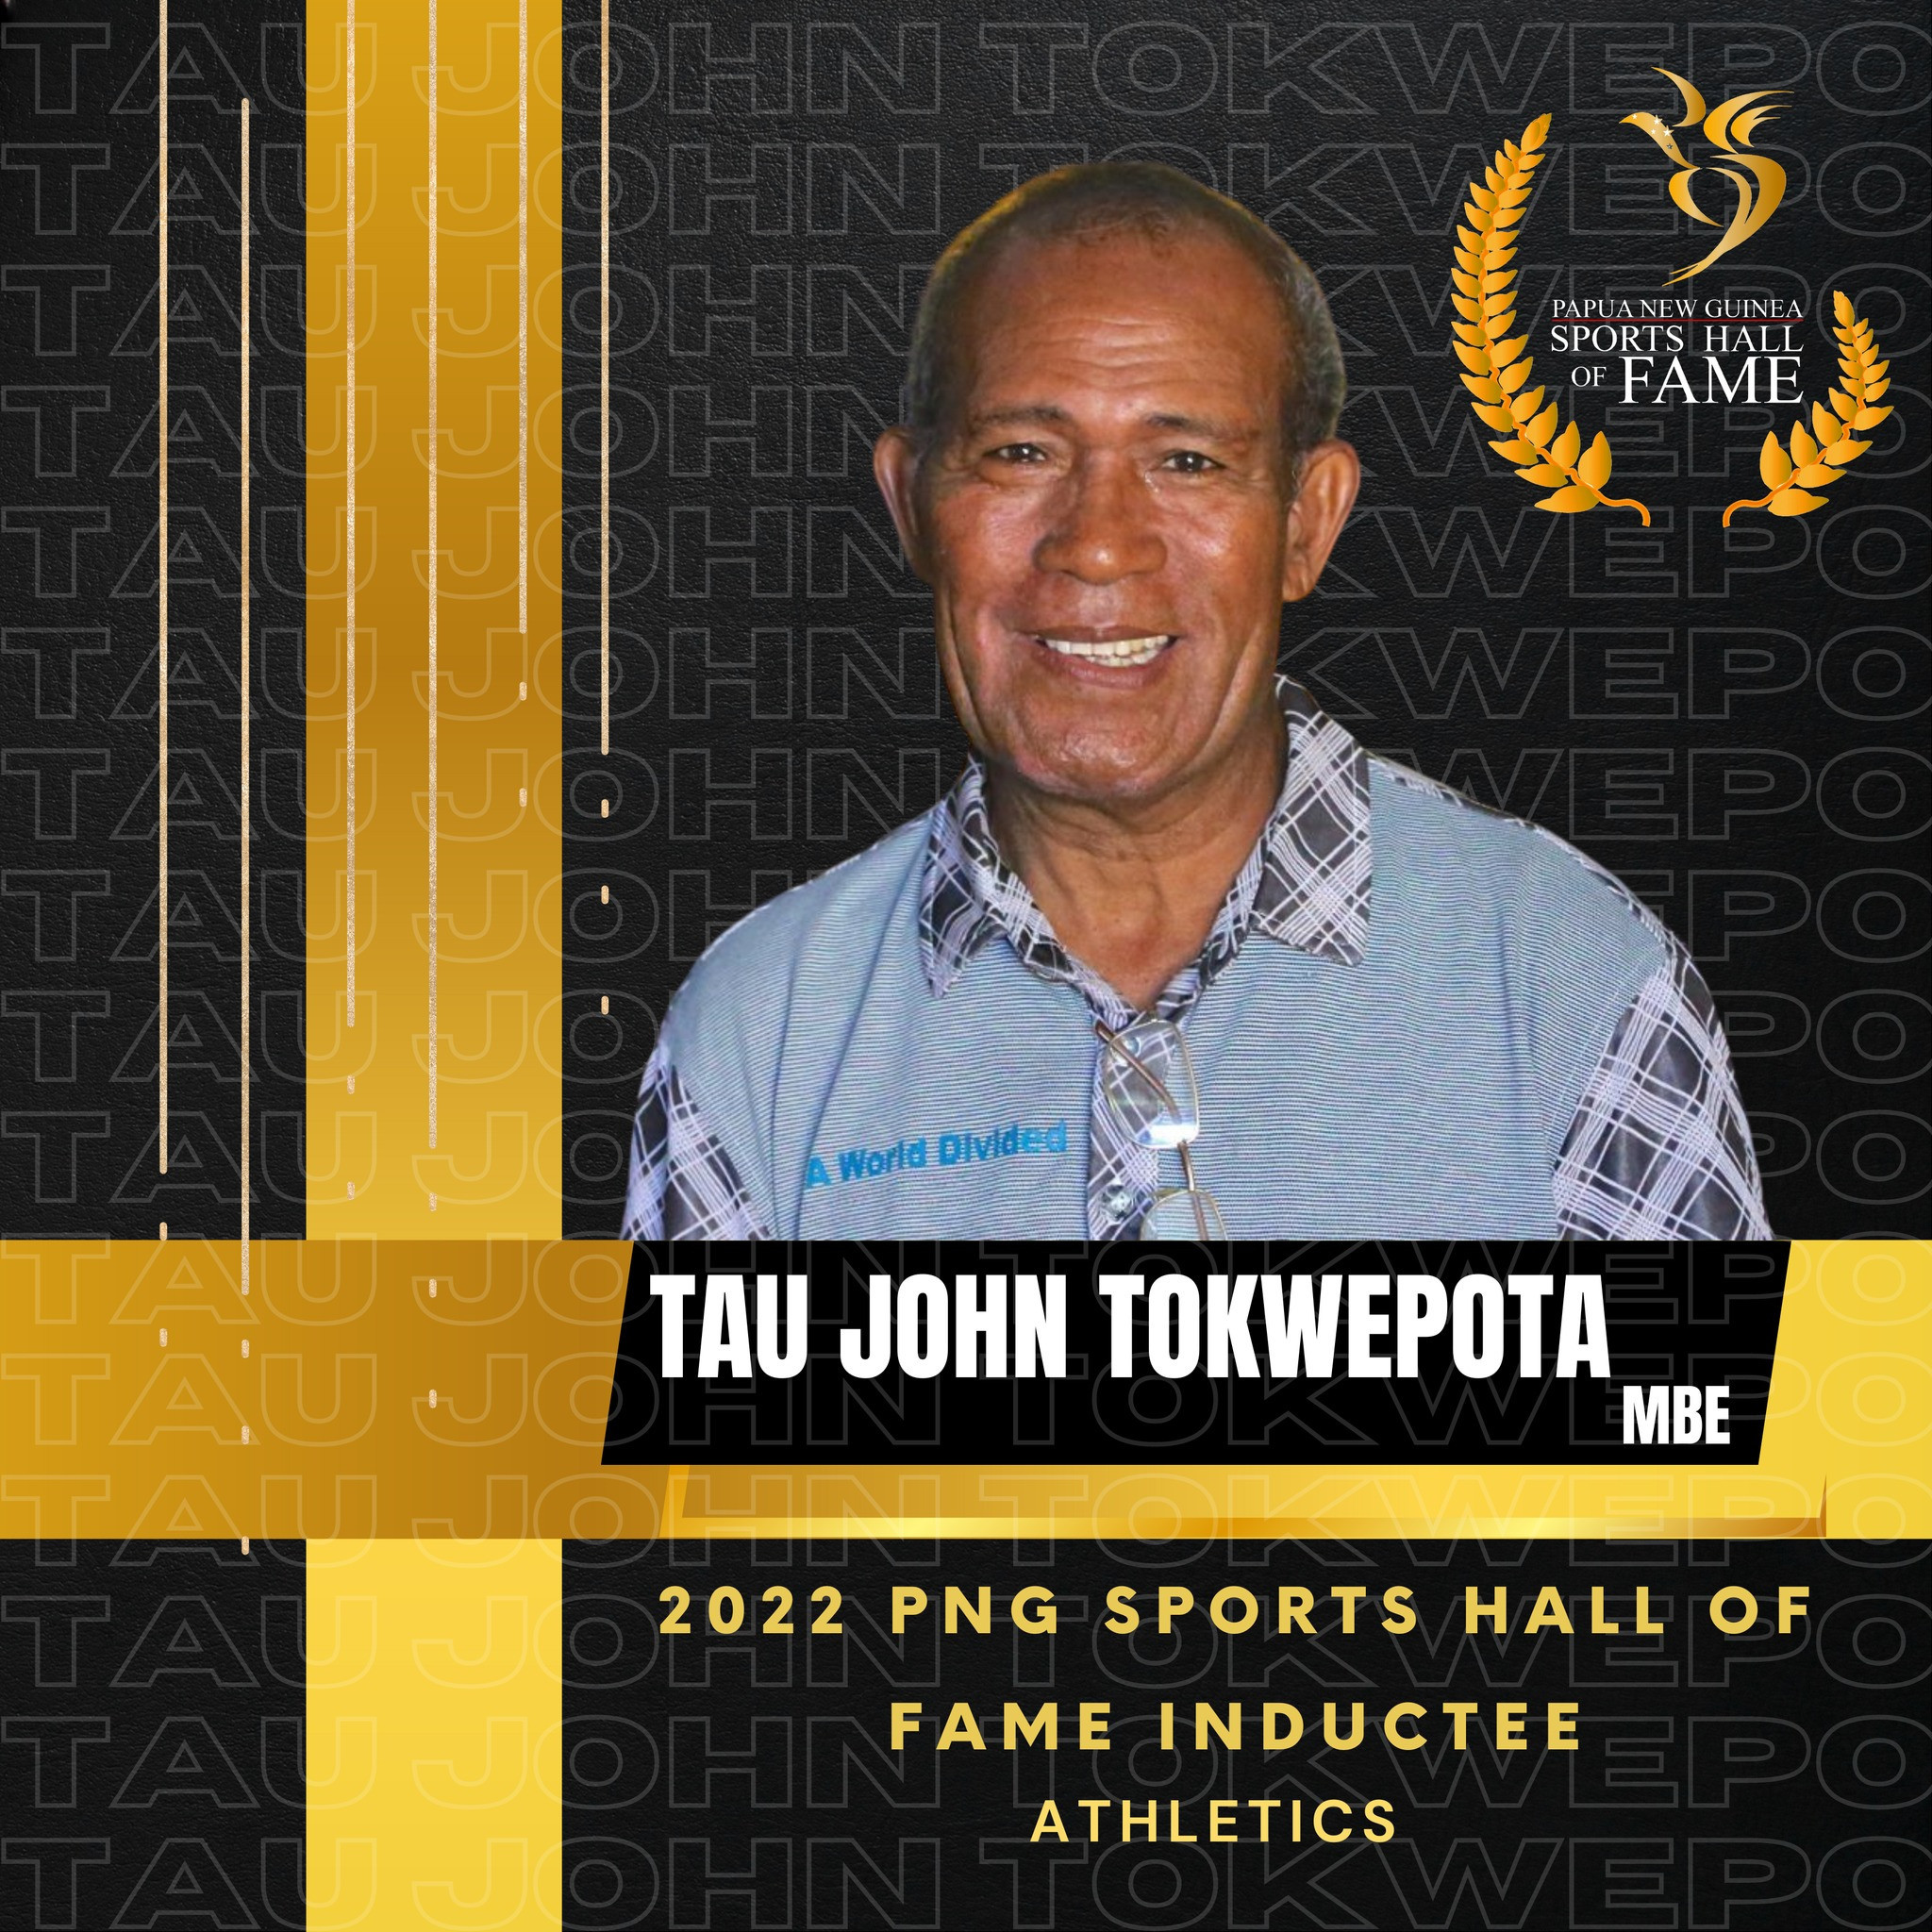 Three legends inducted into PNG Sports Hall of Fame